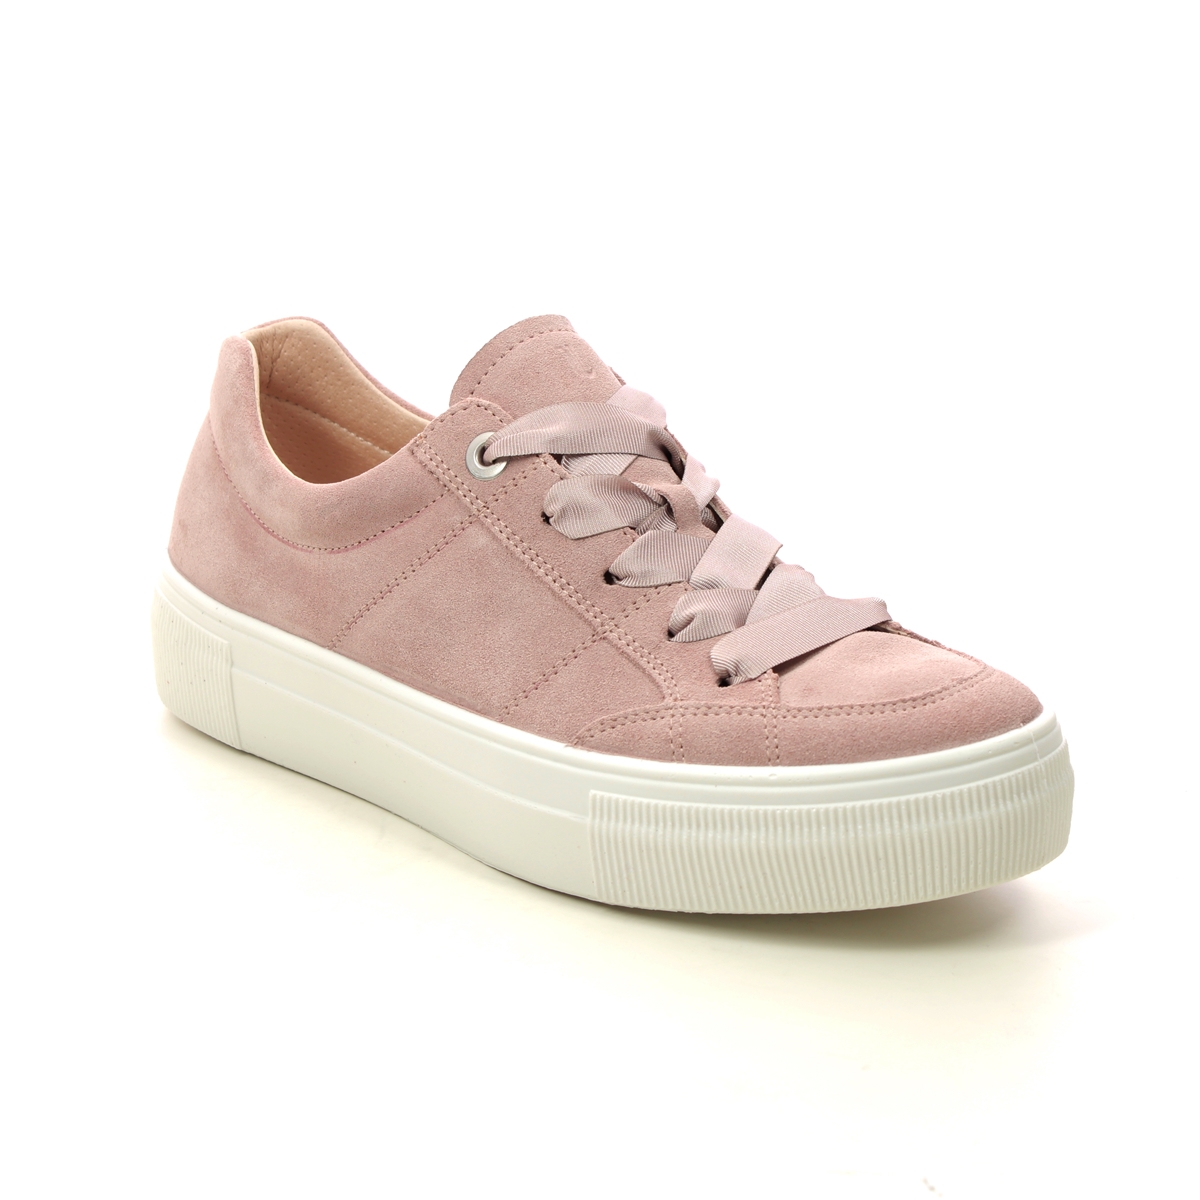 Legero Lima Stitch Pink Suede Womens Trainers 0600910-5600 In Size 41 In Plain Pink Suede